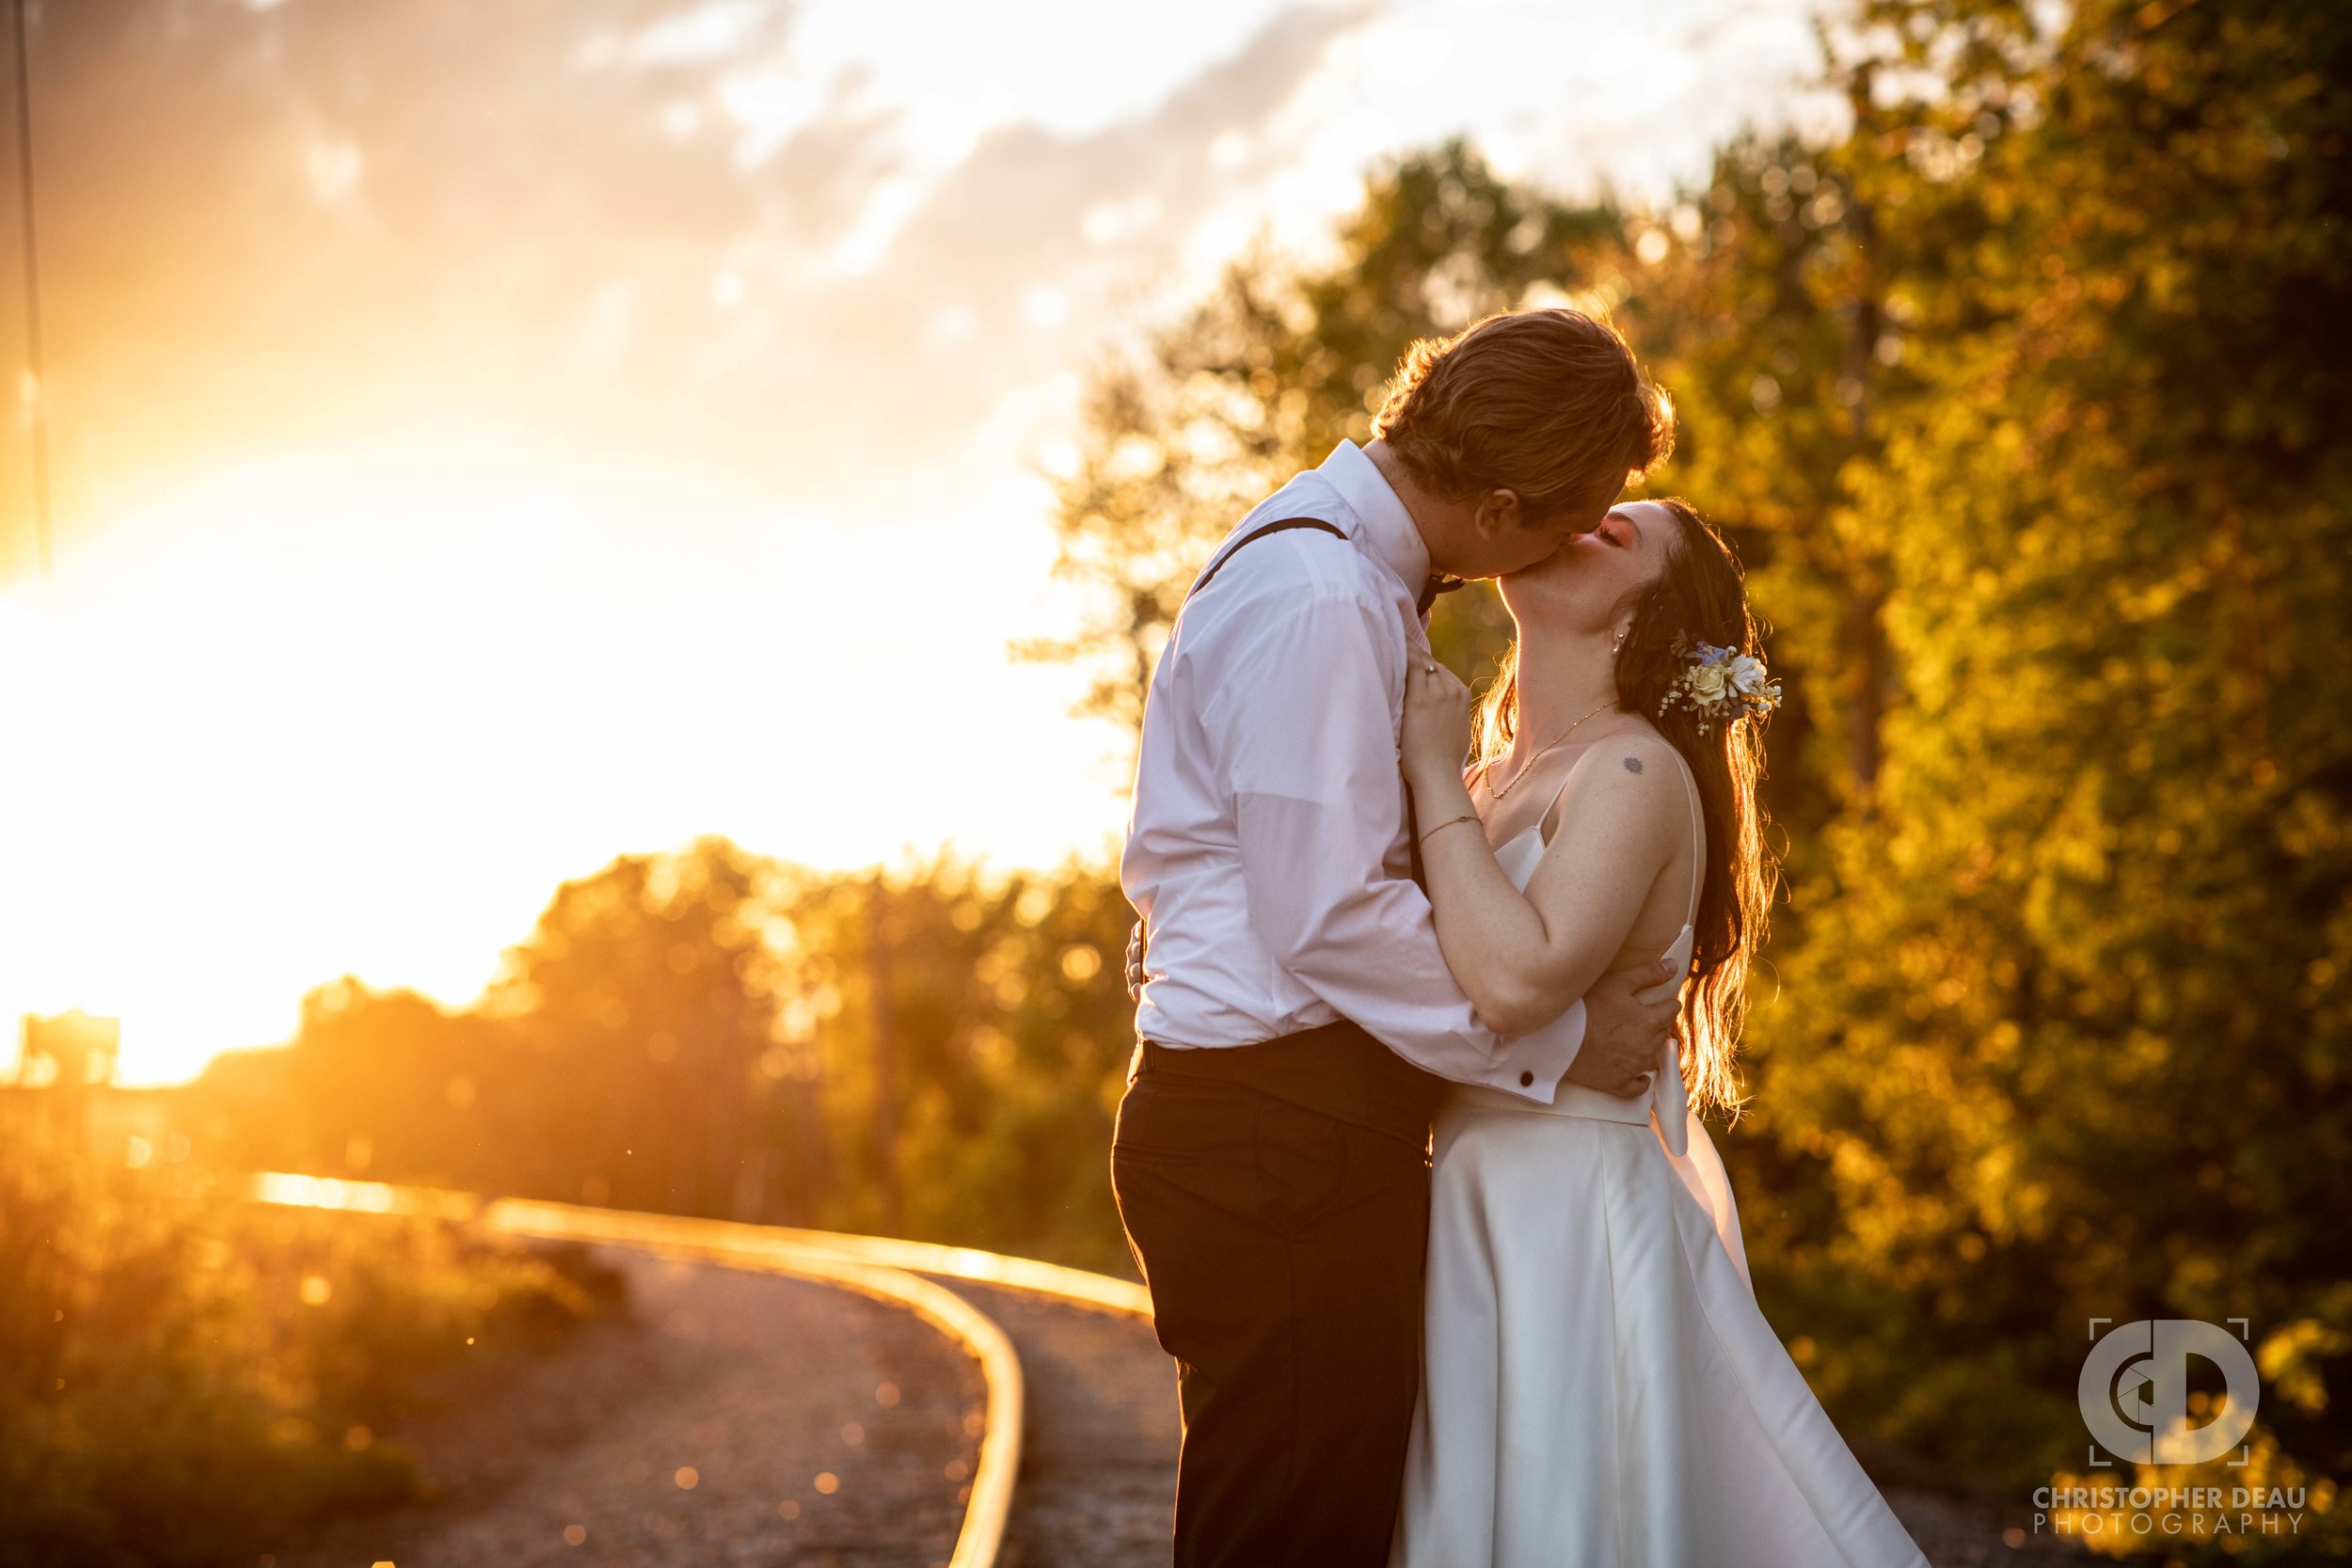  bride and groom kissing during golden hour sunset 